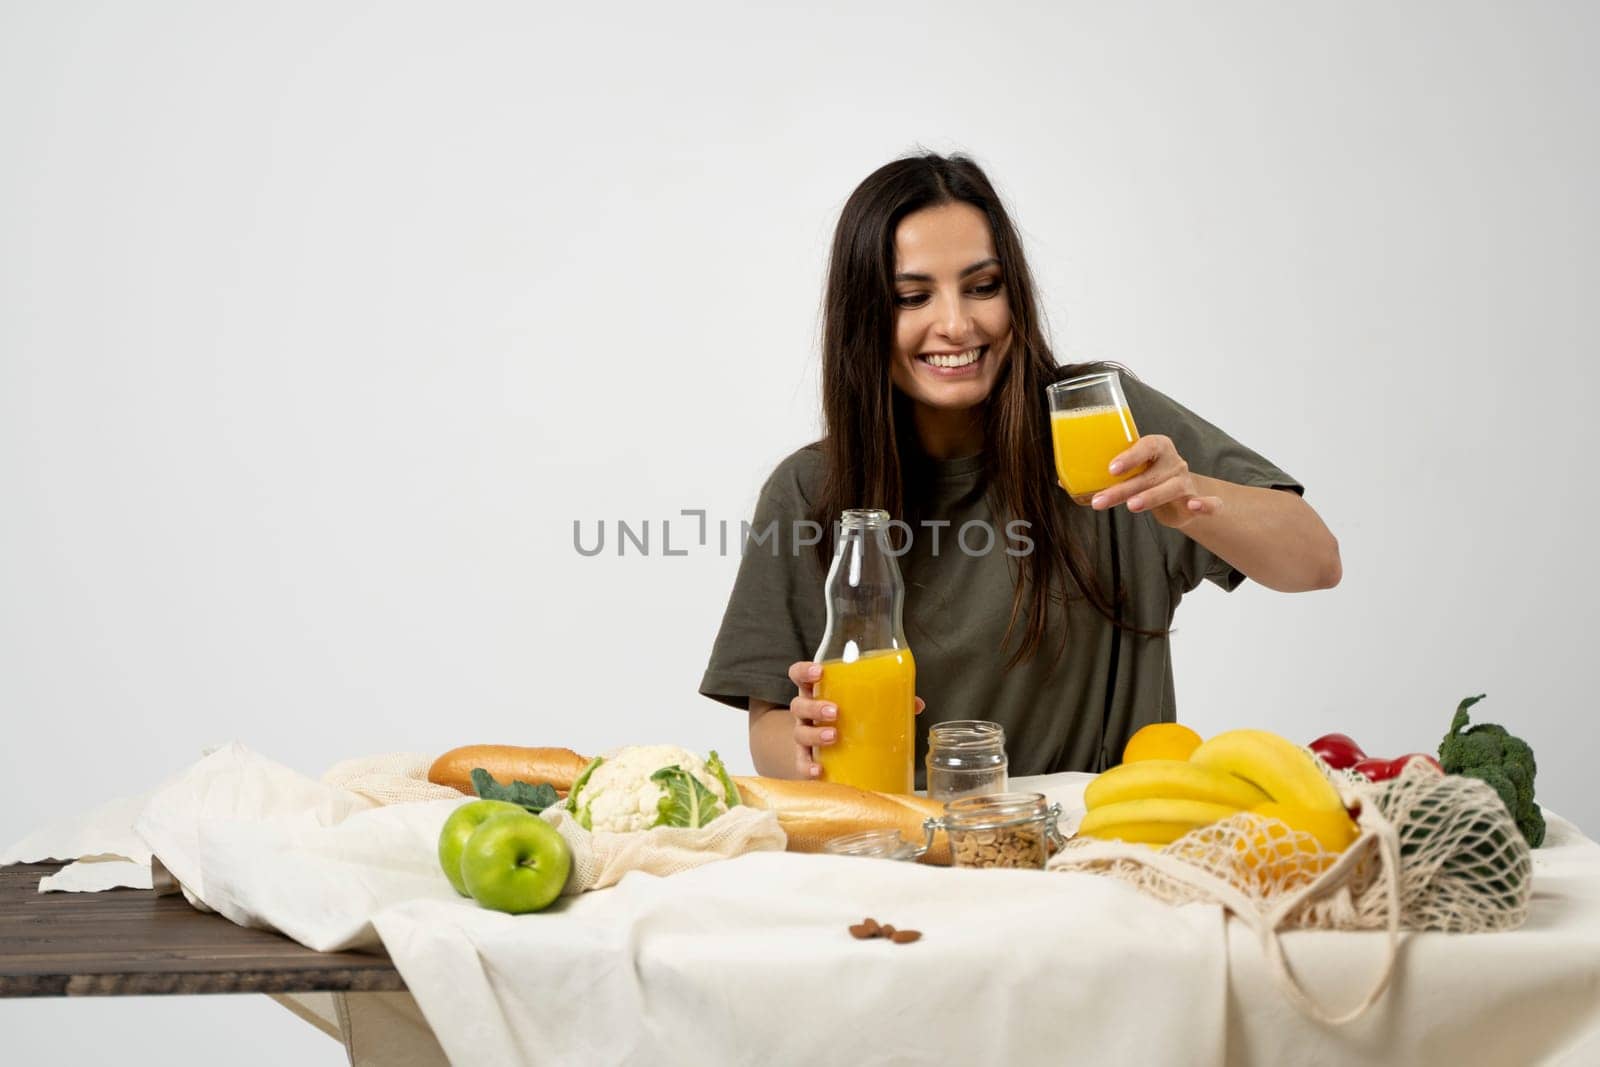 Woman in green t-shirt pouring a juice from a glass bottle in a glass over a table with mesh eco bag, healthy vegan vegetables, fruits, bread, snacks. Zero waste concept. by vovsht